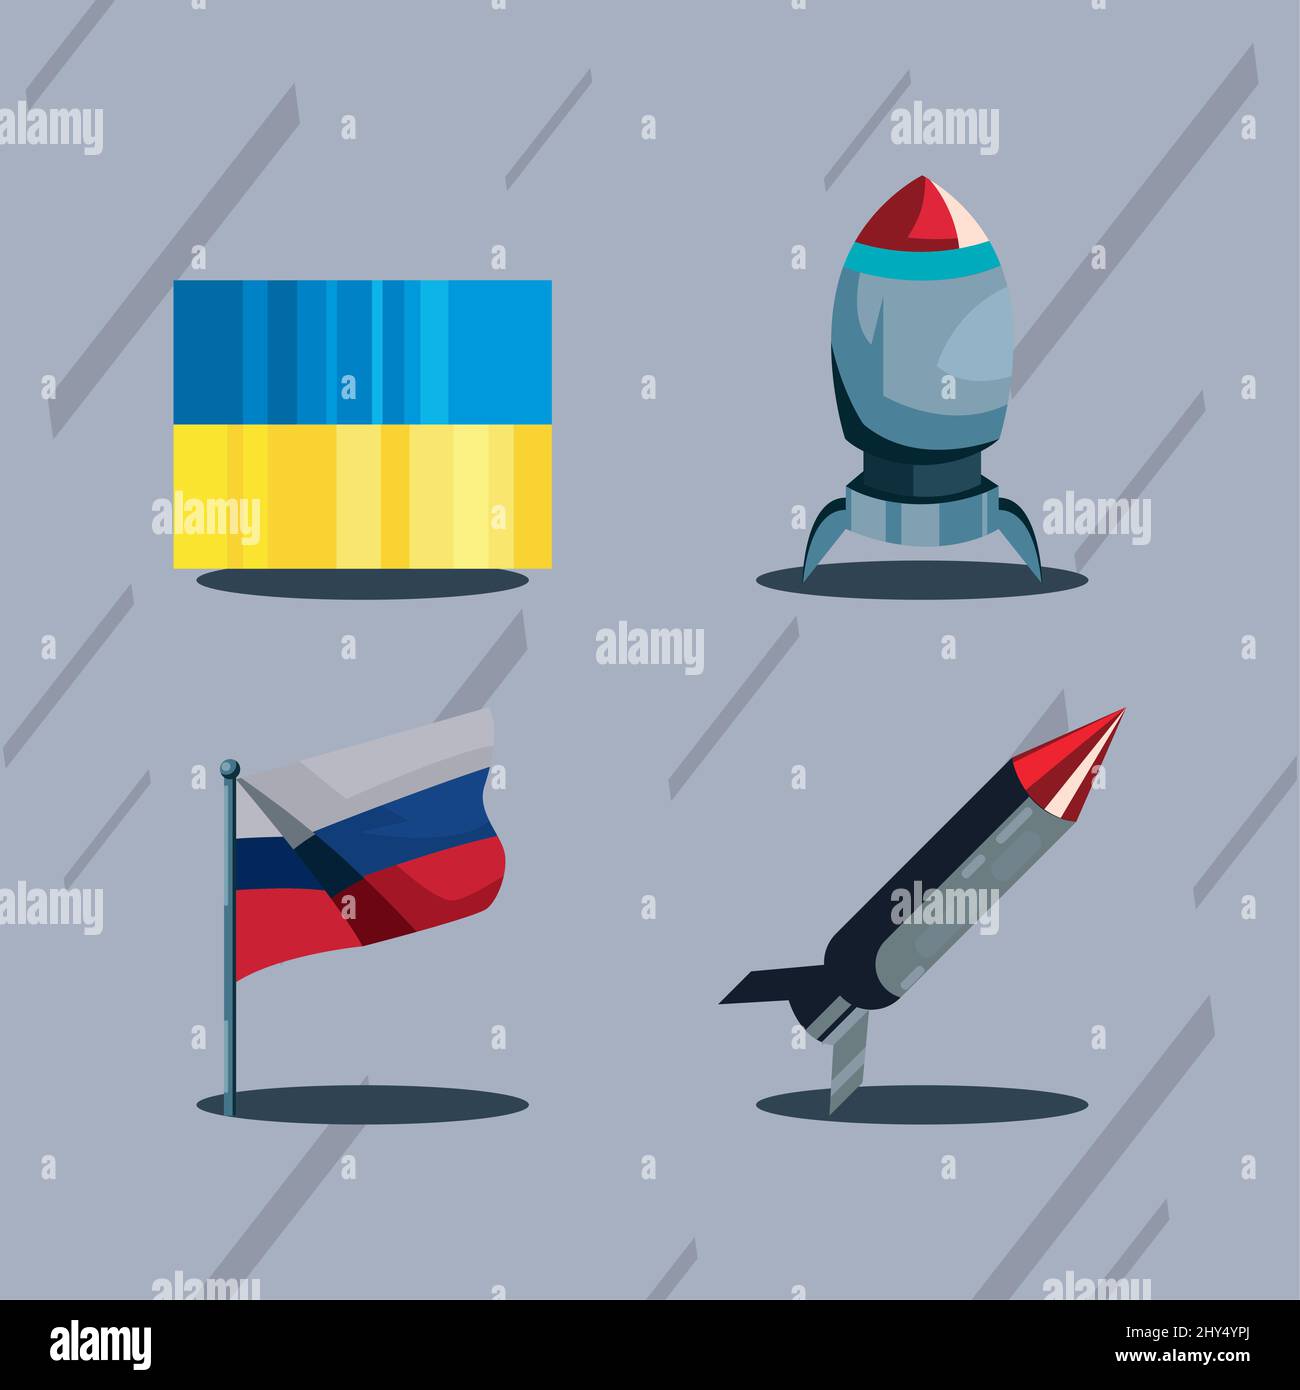 flat russia and ukraine conflict icons Stock Vector